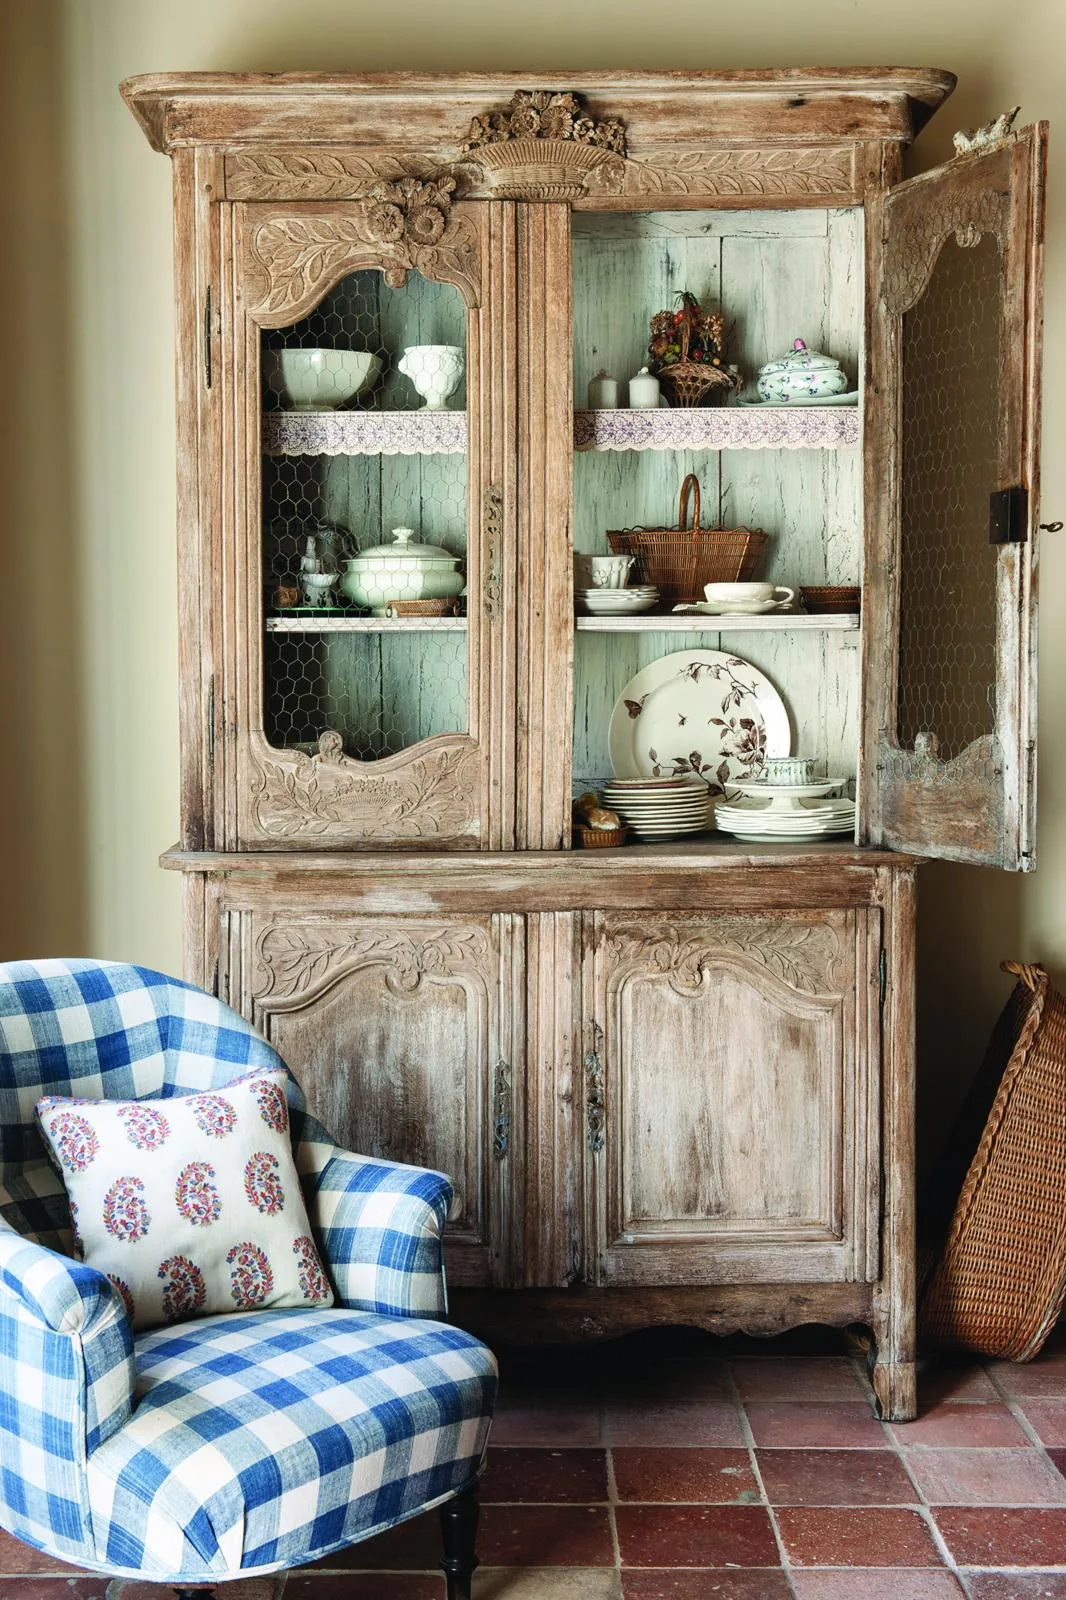 18th-century French farmhouse, marriage cabinet in the kitchen.